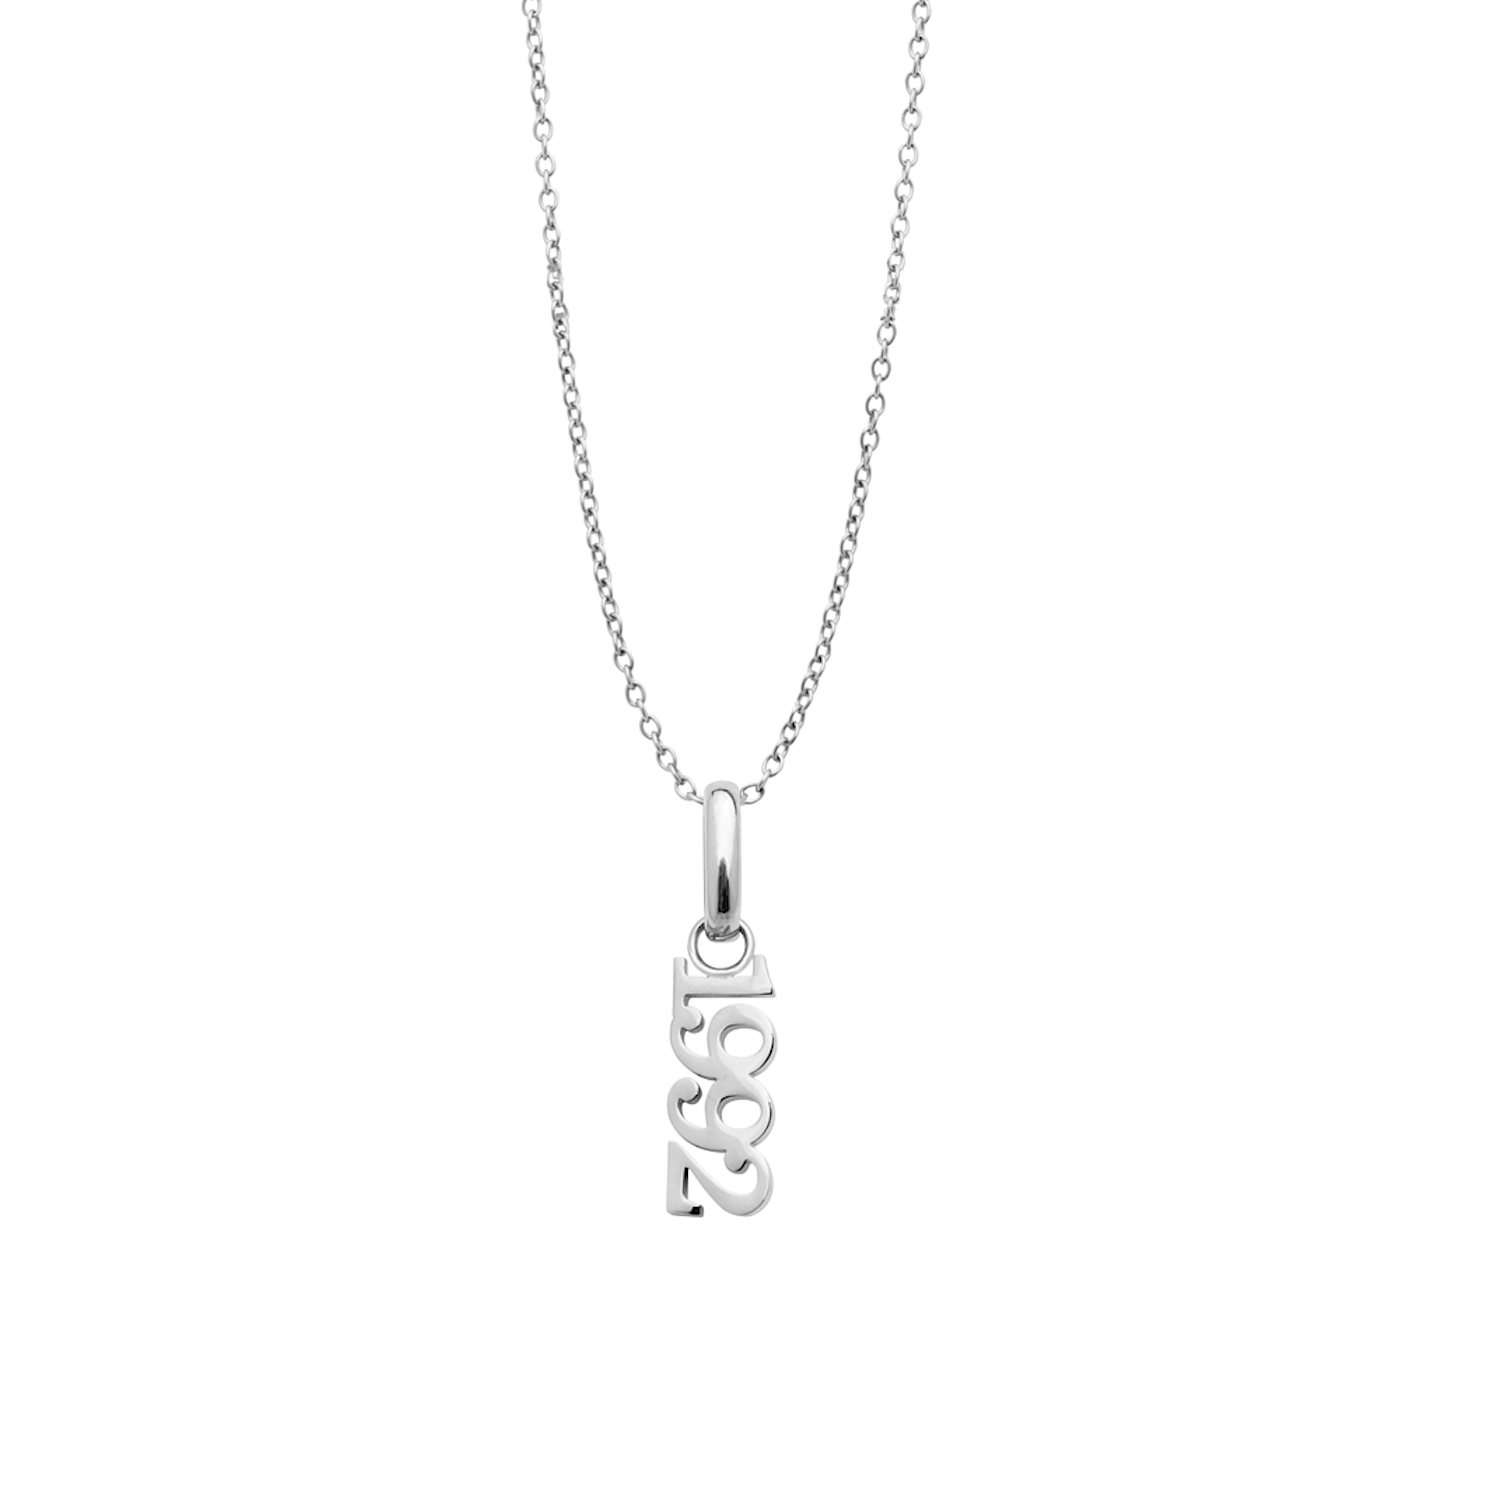 Vertical Editorial Date Necklace (Silver)